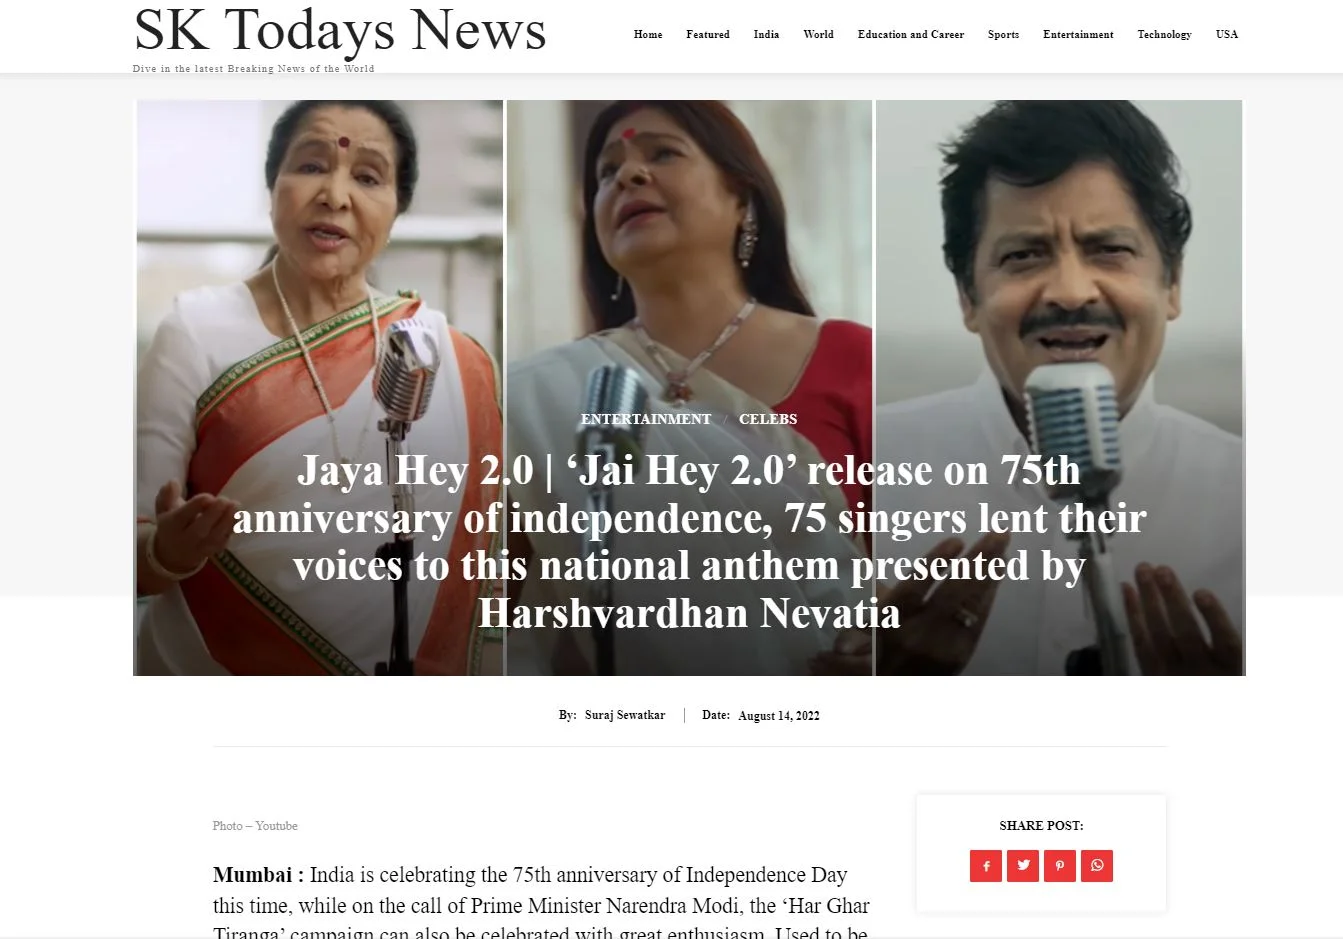 Jaya Hey 2.0 | ‘Jai Hey 2.0’ release on 75th anniversary of independence, 75 singers lent their voices to this national anthem presented by Harshvardhan Nevatia ~Sky Today News